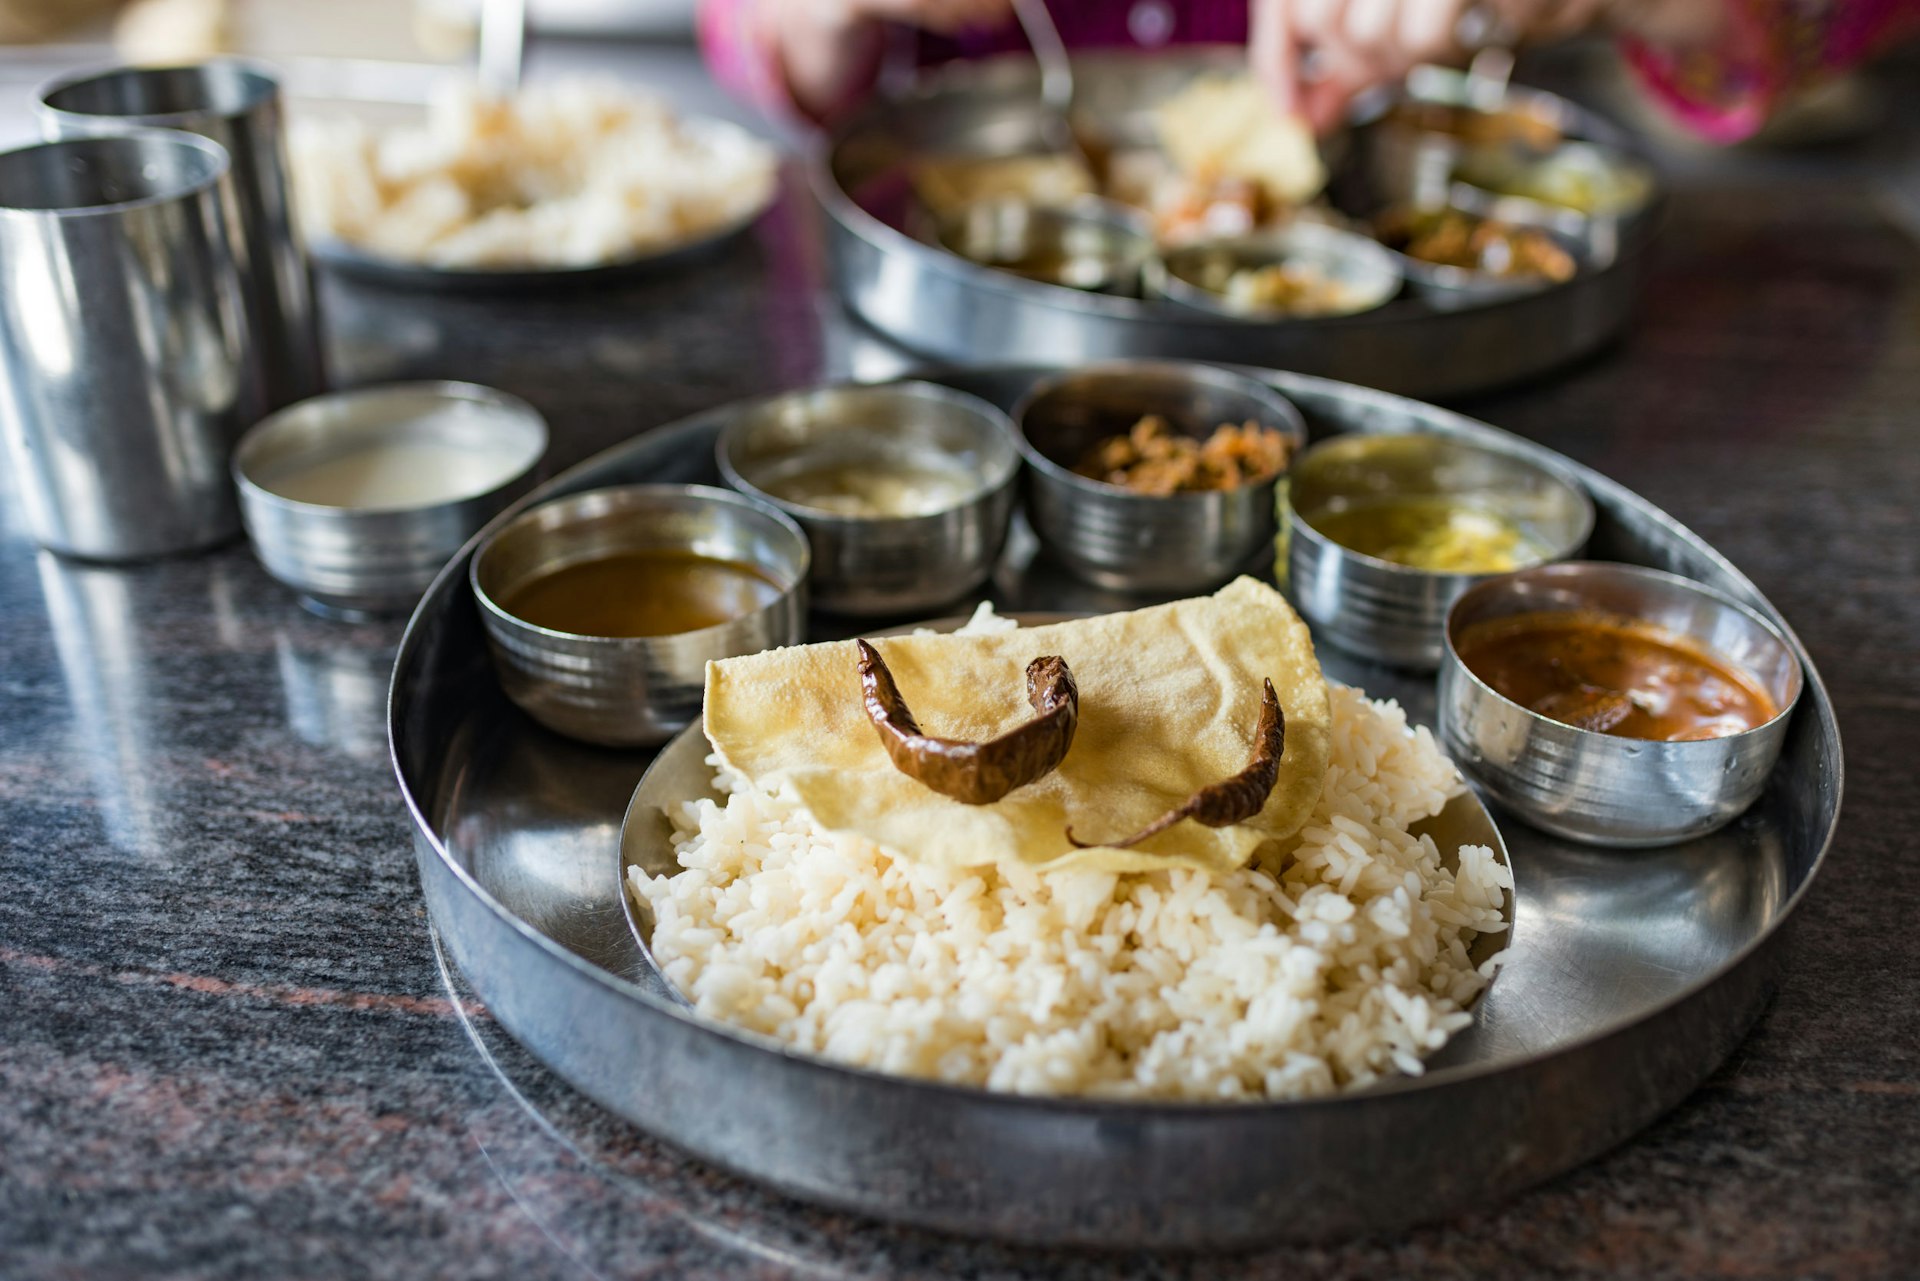 Meals in Sri Lanka are often served on an Indian-style thali plate © Malcolm P Chapman/Getty Images